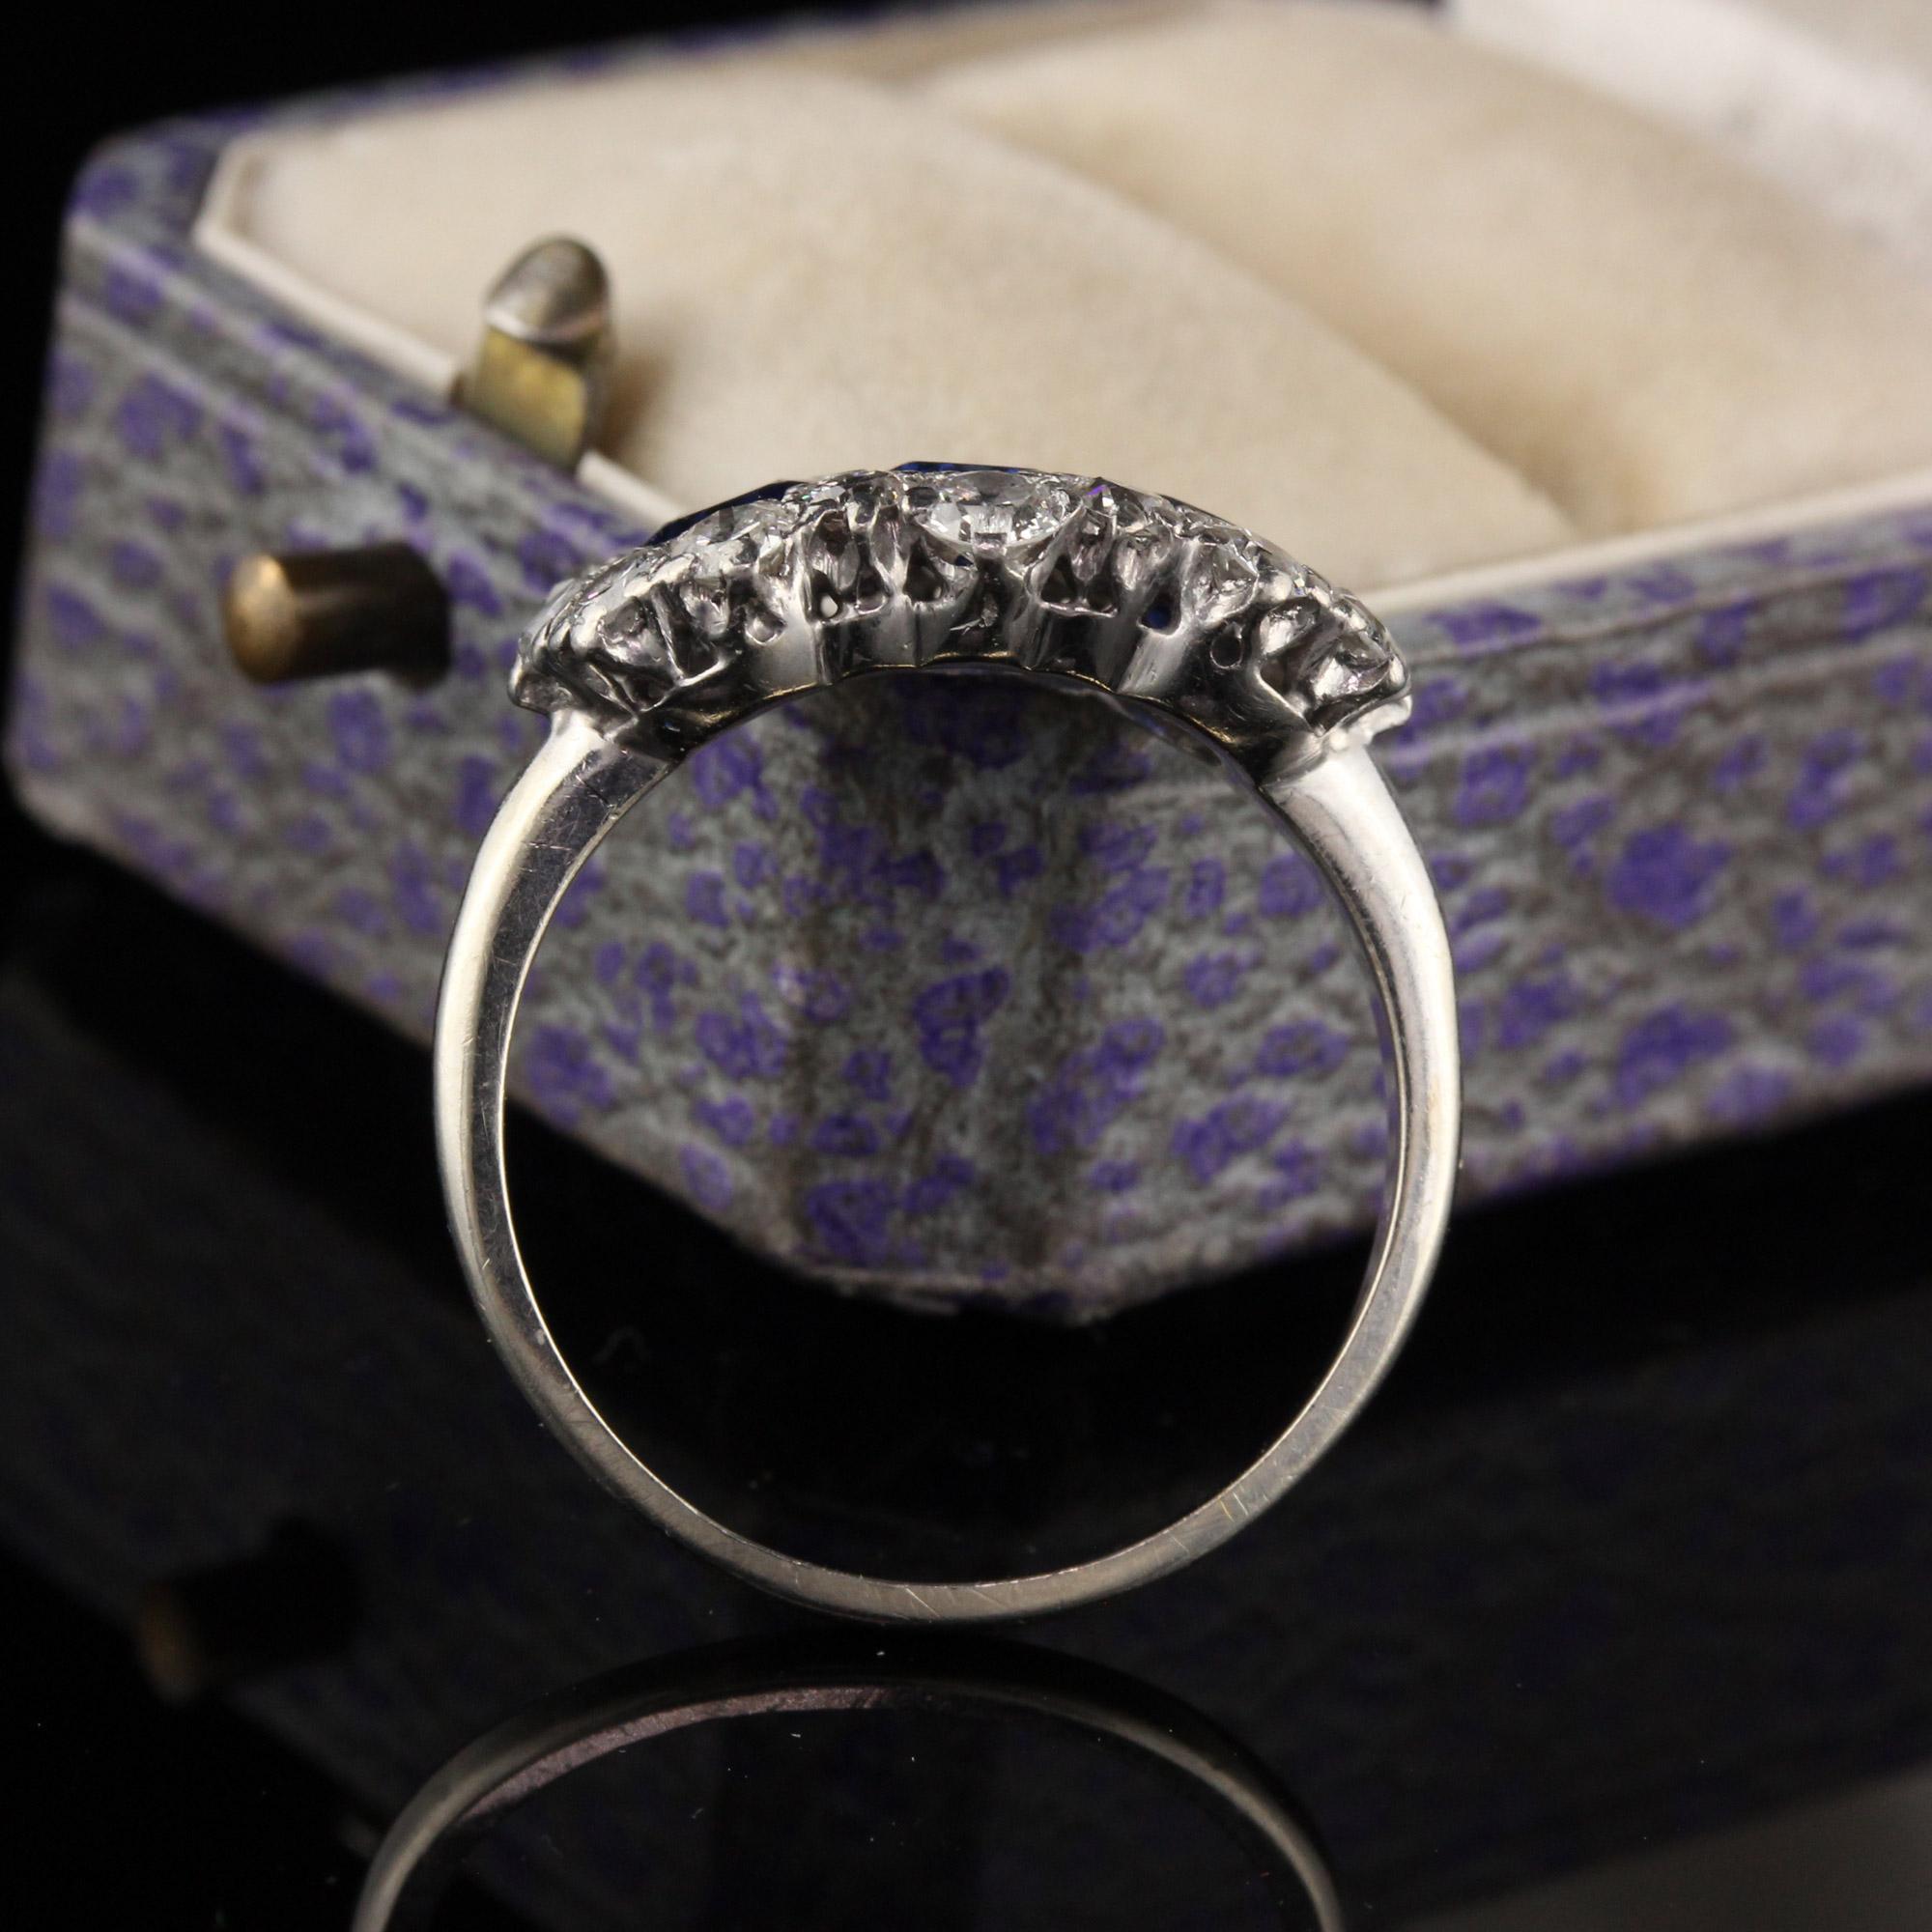 Beautiful antique platinum ring with 3 gorgeous sapphires and diamonds. 

Item #R0540

Metal: Platinum Top & 14K White Gold Shank

Weight: 4.1 Grams

Total Diamond Weight: Approximately 1.5 cts

Diamond Color: H

Diamond Clarity: VS2

Ring Size: